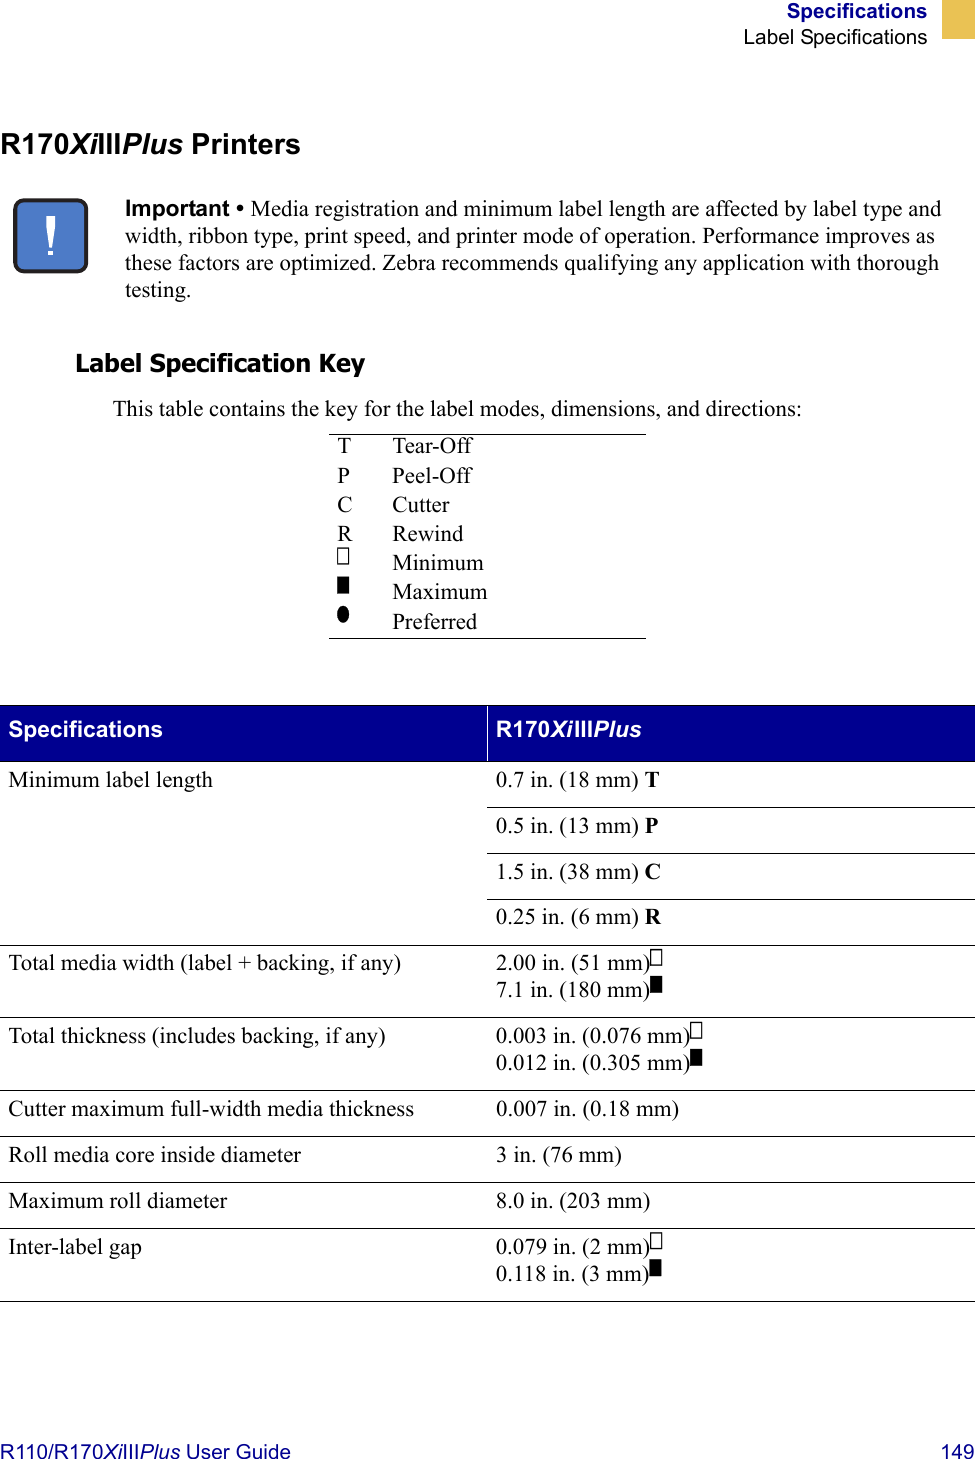 SpecificationsLabel SpecificationsR110/R170XiIIIPlus User Guide  149R170XiIIIPlus PrintersLabel Specification KeyThis table contains the key for the label modes, dimensions, and directions: Important • Media registration and minimum label length are affected by label type and width, ribbon type, print speed, and printer mode of operation. Performance improves as these factors are optimized. Zebra recommends qualifying any application with thorough testing.T Tear-OffPPeel-OffC CutterRRewindMinimumMaximumPreferredSpecifications R170Xi IIIPlusMinimum label length 0.7 in. (18 mm) T0.5in. (13mm) P1.5in. (38mm) C0.25 in. (6 mm) RTotal media width (label + backing, if any) 2.00 in. (51 mm)7.1 in. (180 mm)Total thickness (includes backing, if any) 0.003 in. (0.076 mm)0.012 in. (0.305 mm)Cutter maximum full-width media thickness 0.007 in. (0.18 mm)Roll media core inside diameter 3 in. (76 mm)Maximum roll diameter 8.0 in. (203 mm)Inter-label gap 0.079 in. (2 mm)0.118 in. (3 mm)